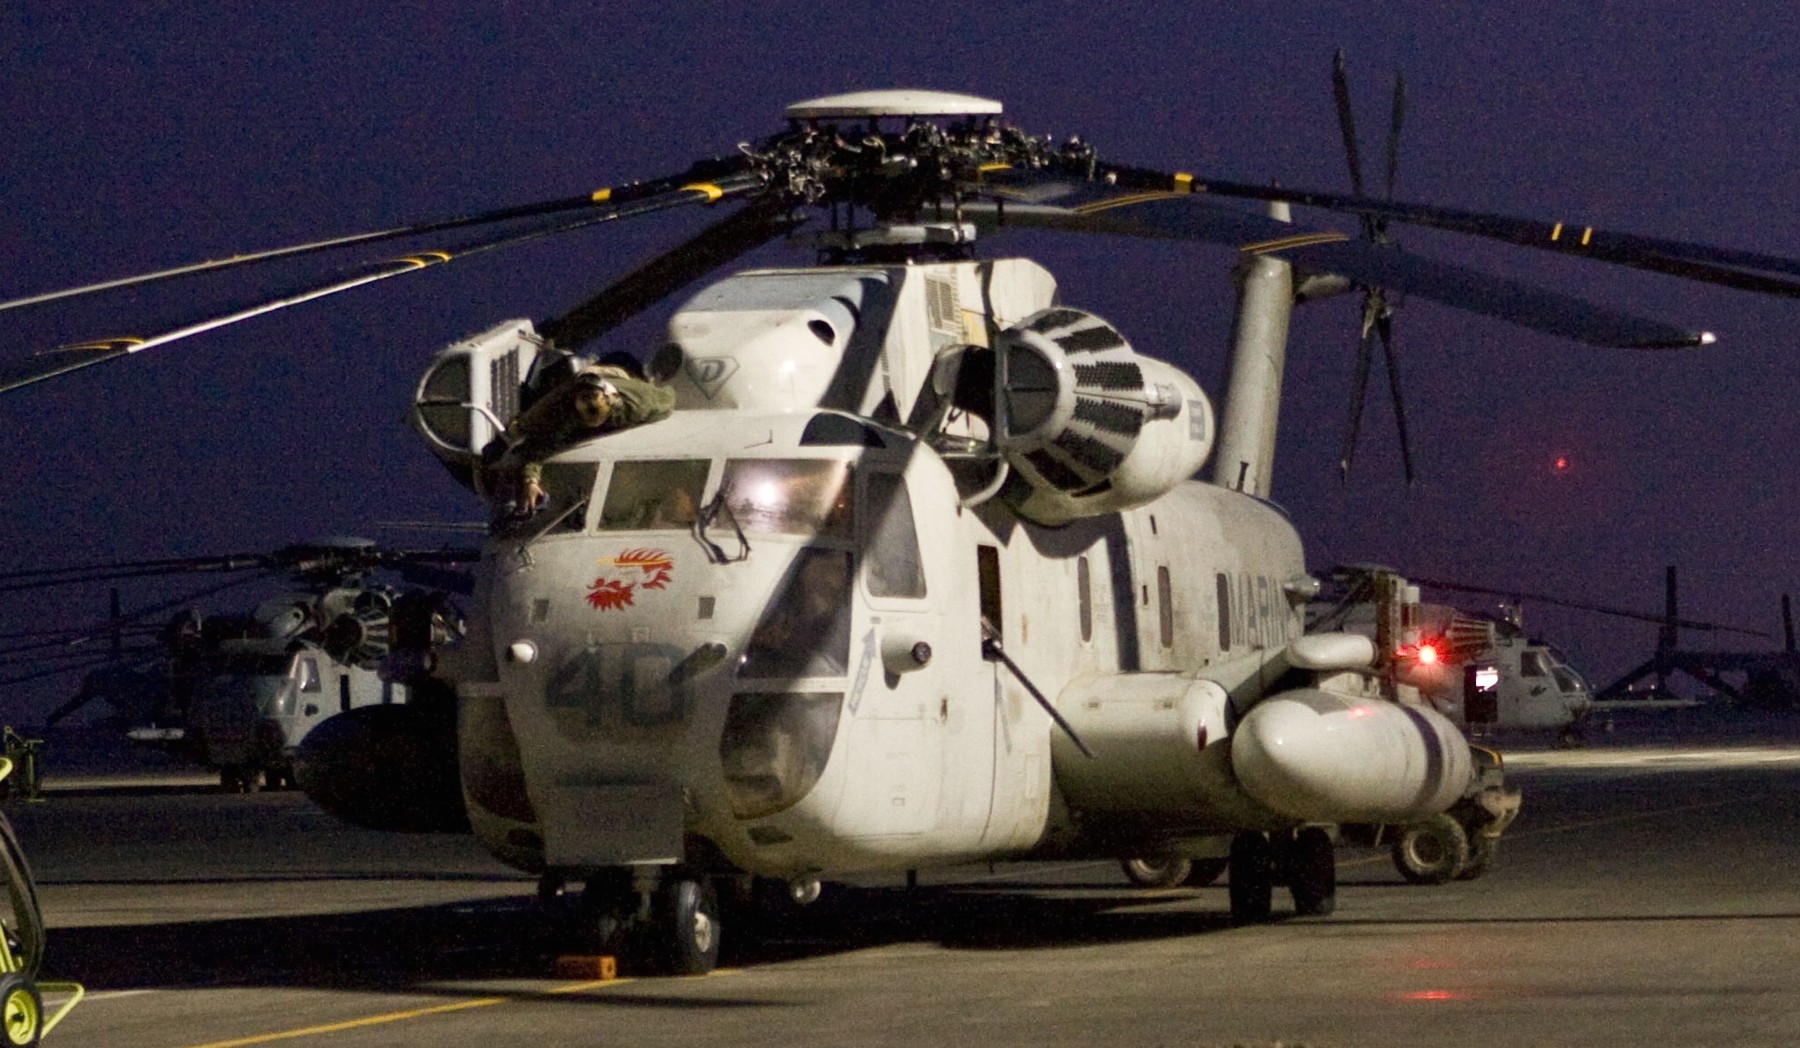 hmh-362 ugly angels marine heavy helicopter squadron usmc sikorsky ch-53d sea stallion 38